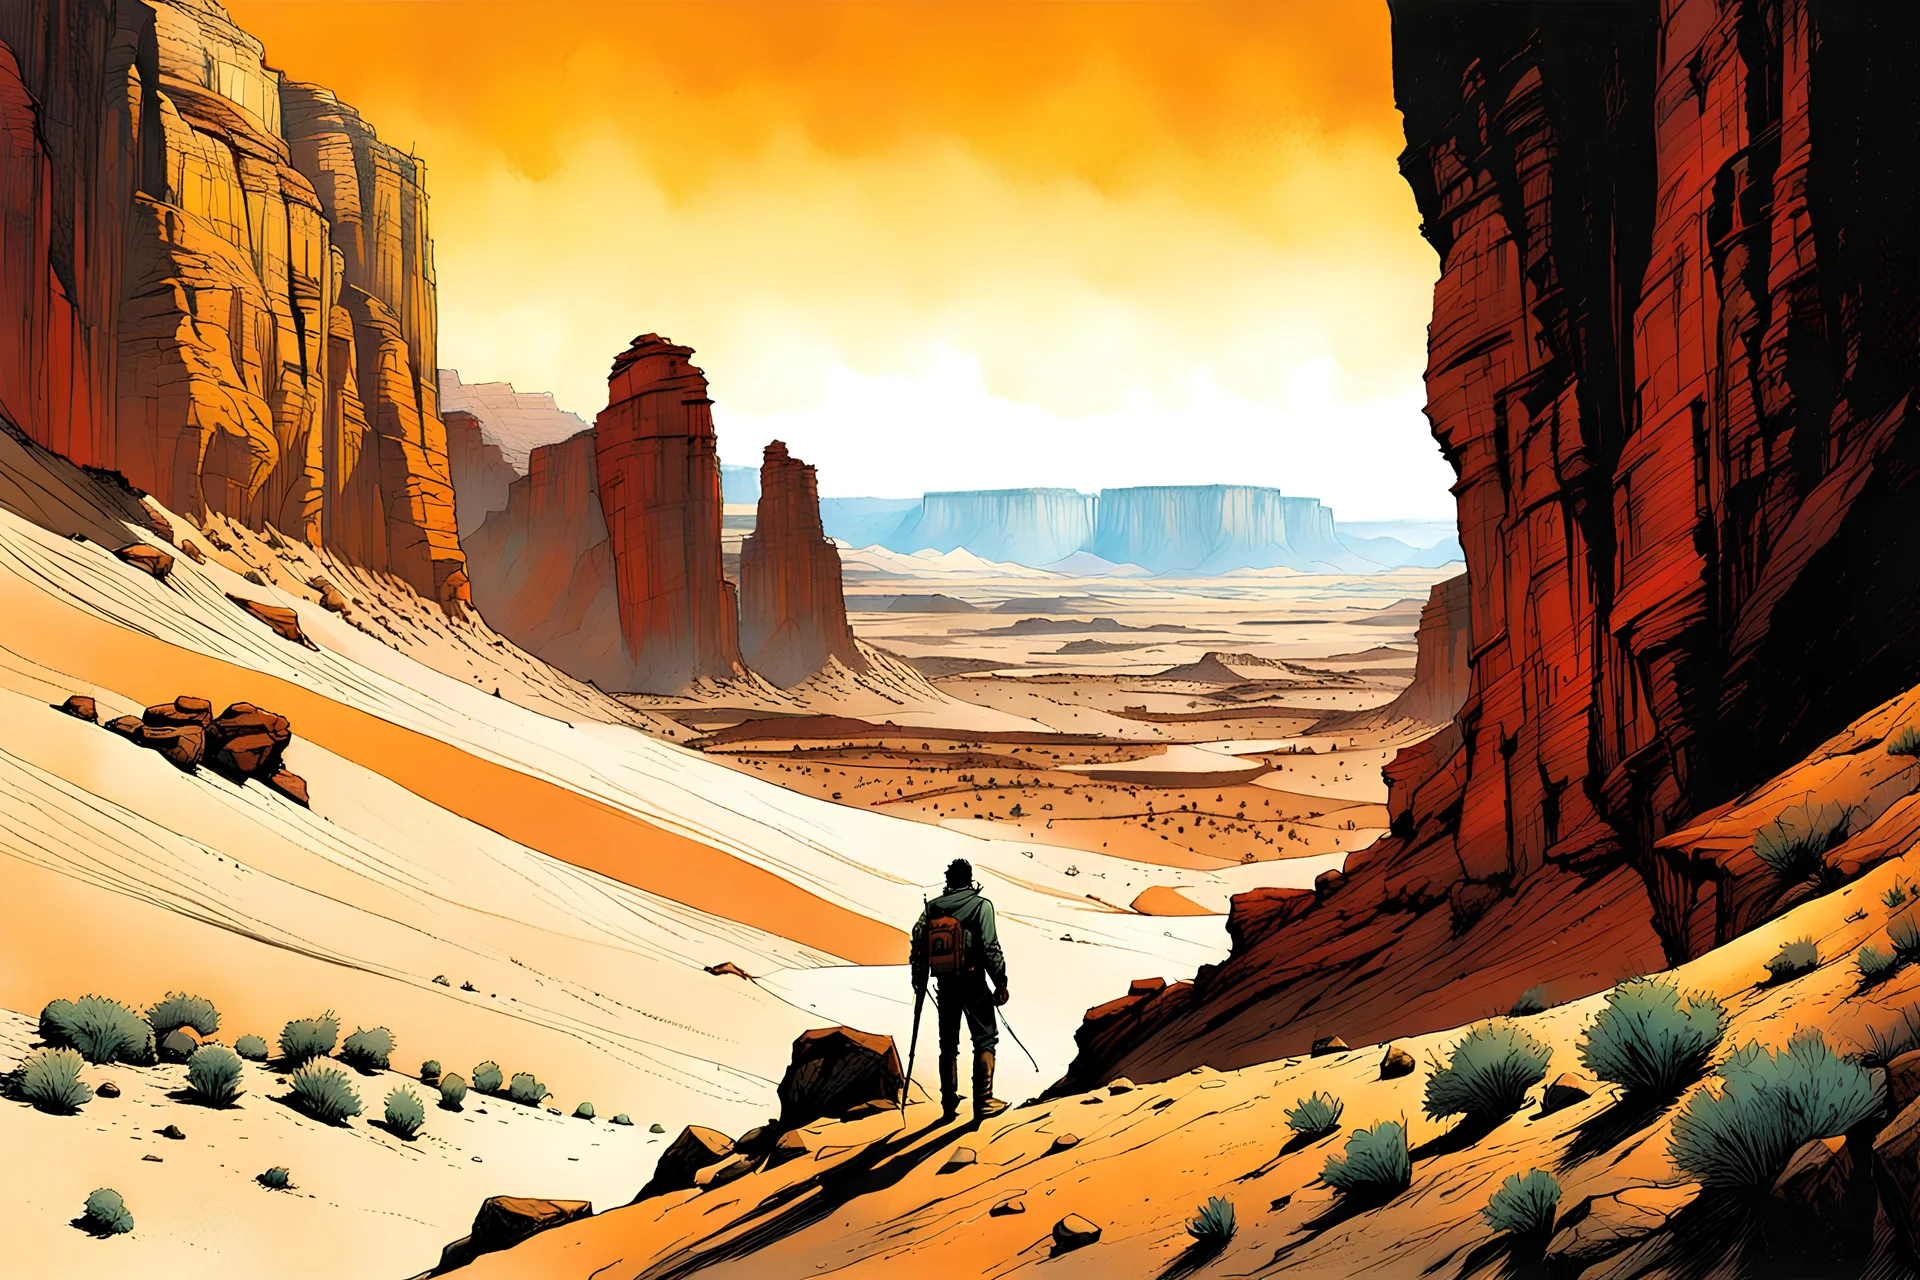 create a surreal illustration of a lost nomadic wanderer with highly detailed, sharply lined facial features at the precipice of insanity in the shadowed canyon lands of oblivion in the comic art style of Bill Sienkiewicz , Philippe Druillet, and Enki Bilal, precisely drawn, boldly inked in arid desert colors